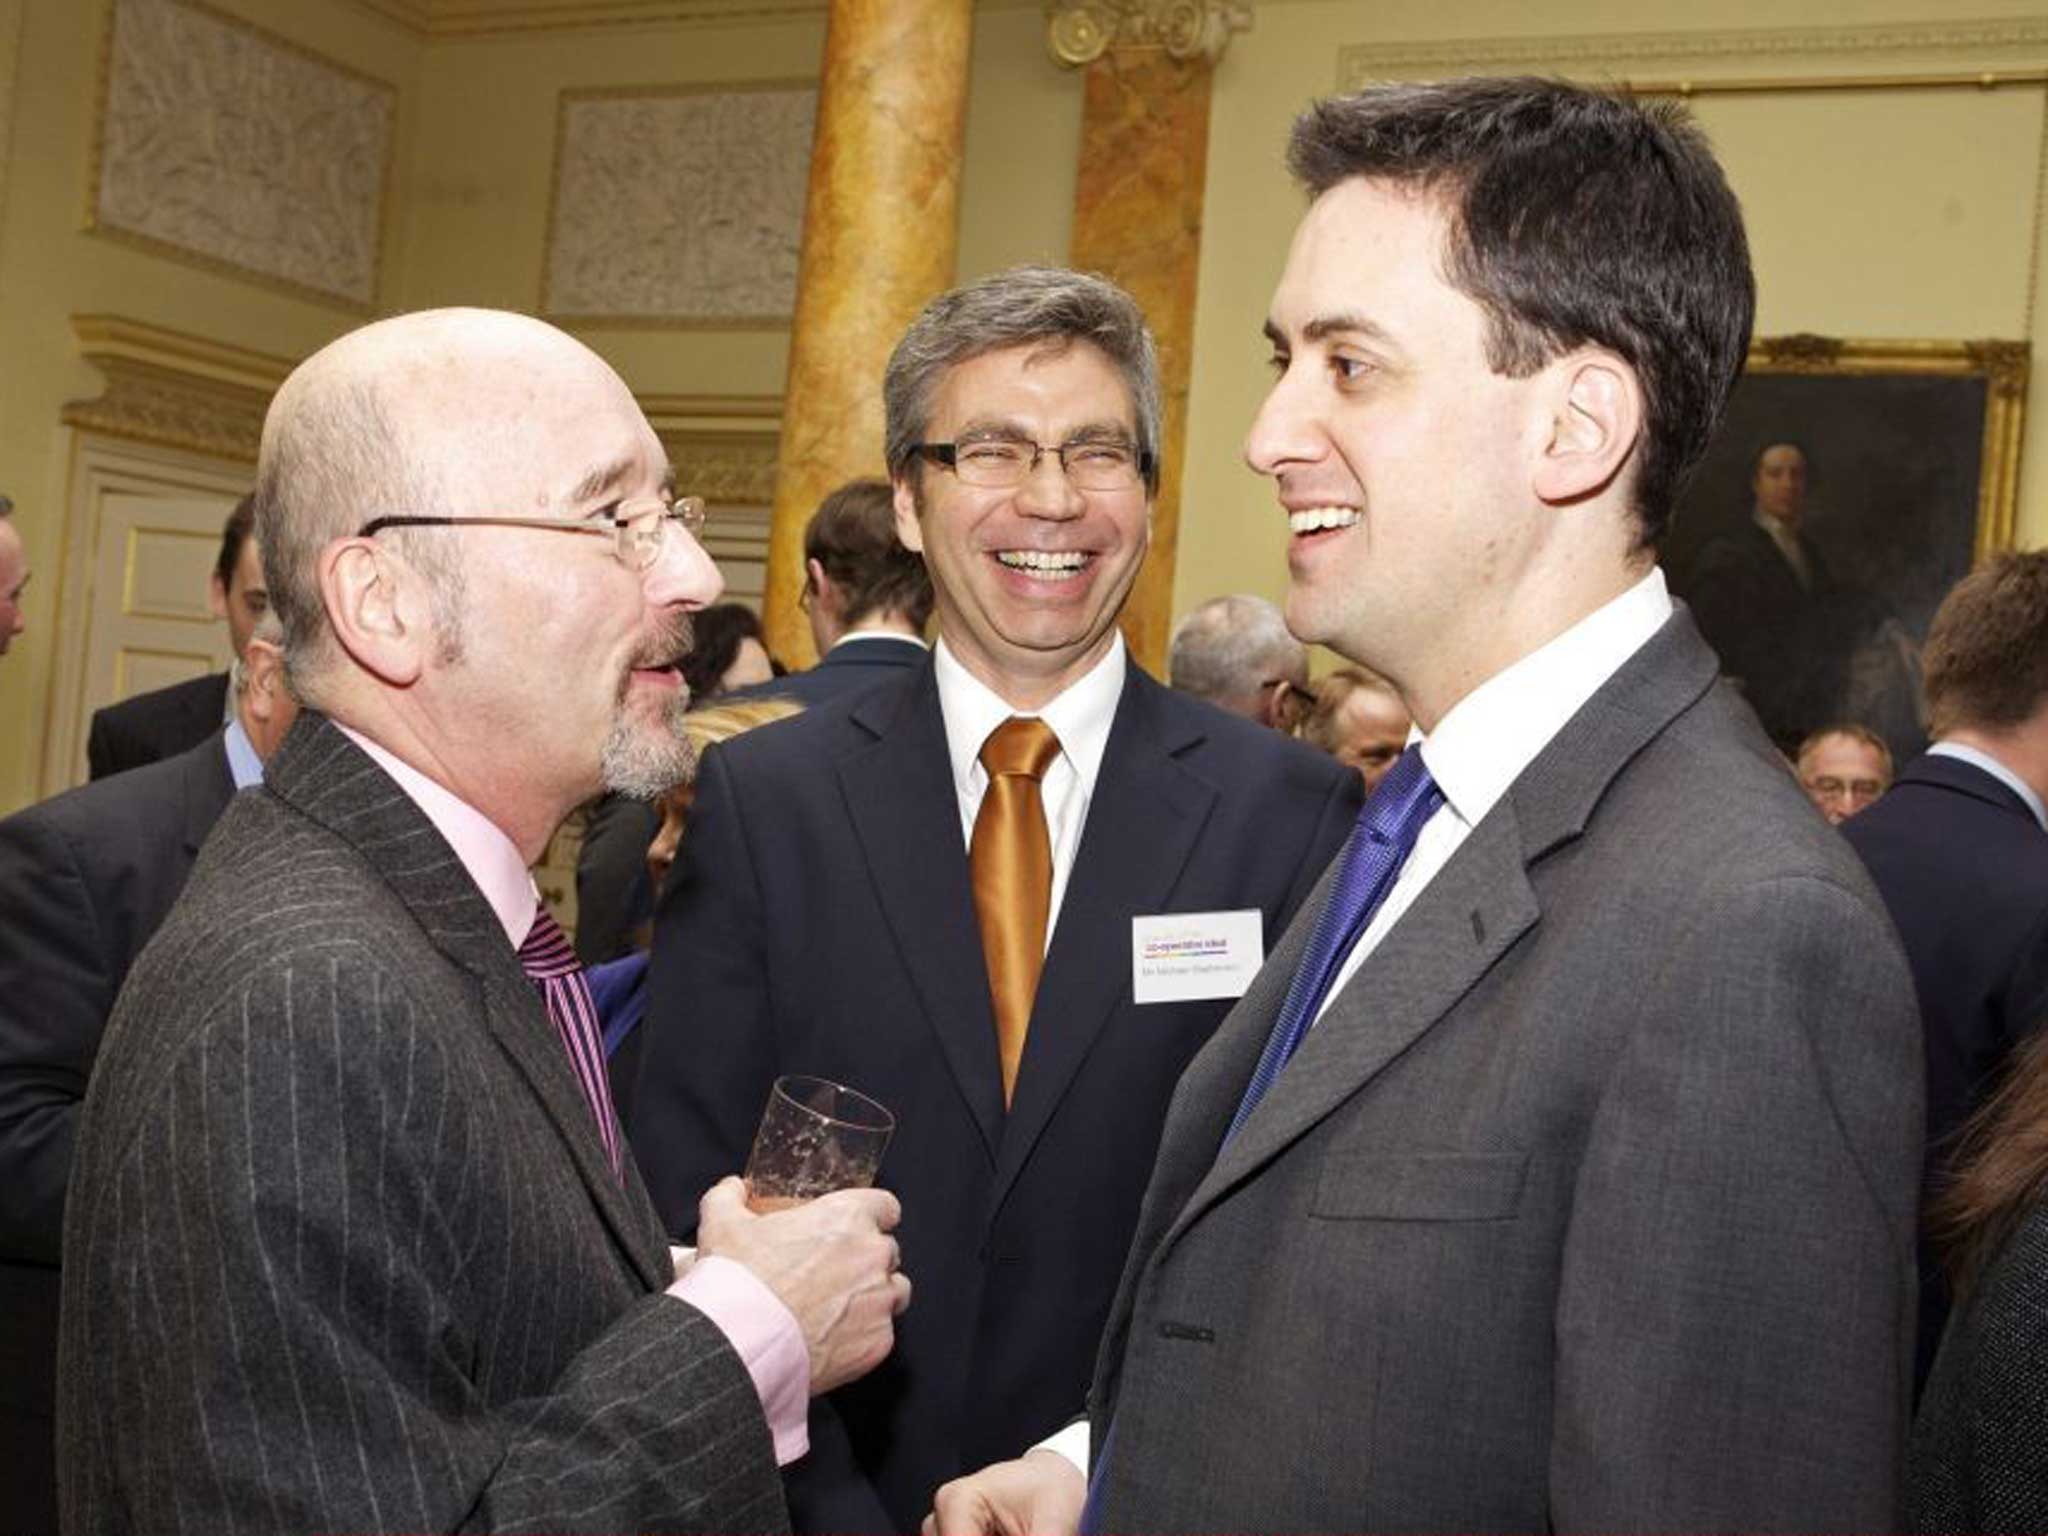 Old ties: Ed Miliband talks to former group Co-op chairman Len Wardle in Downing Street in 2010